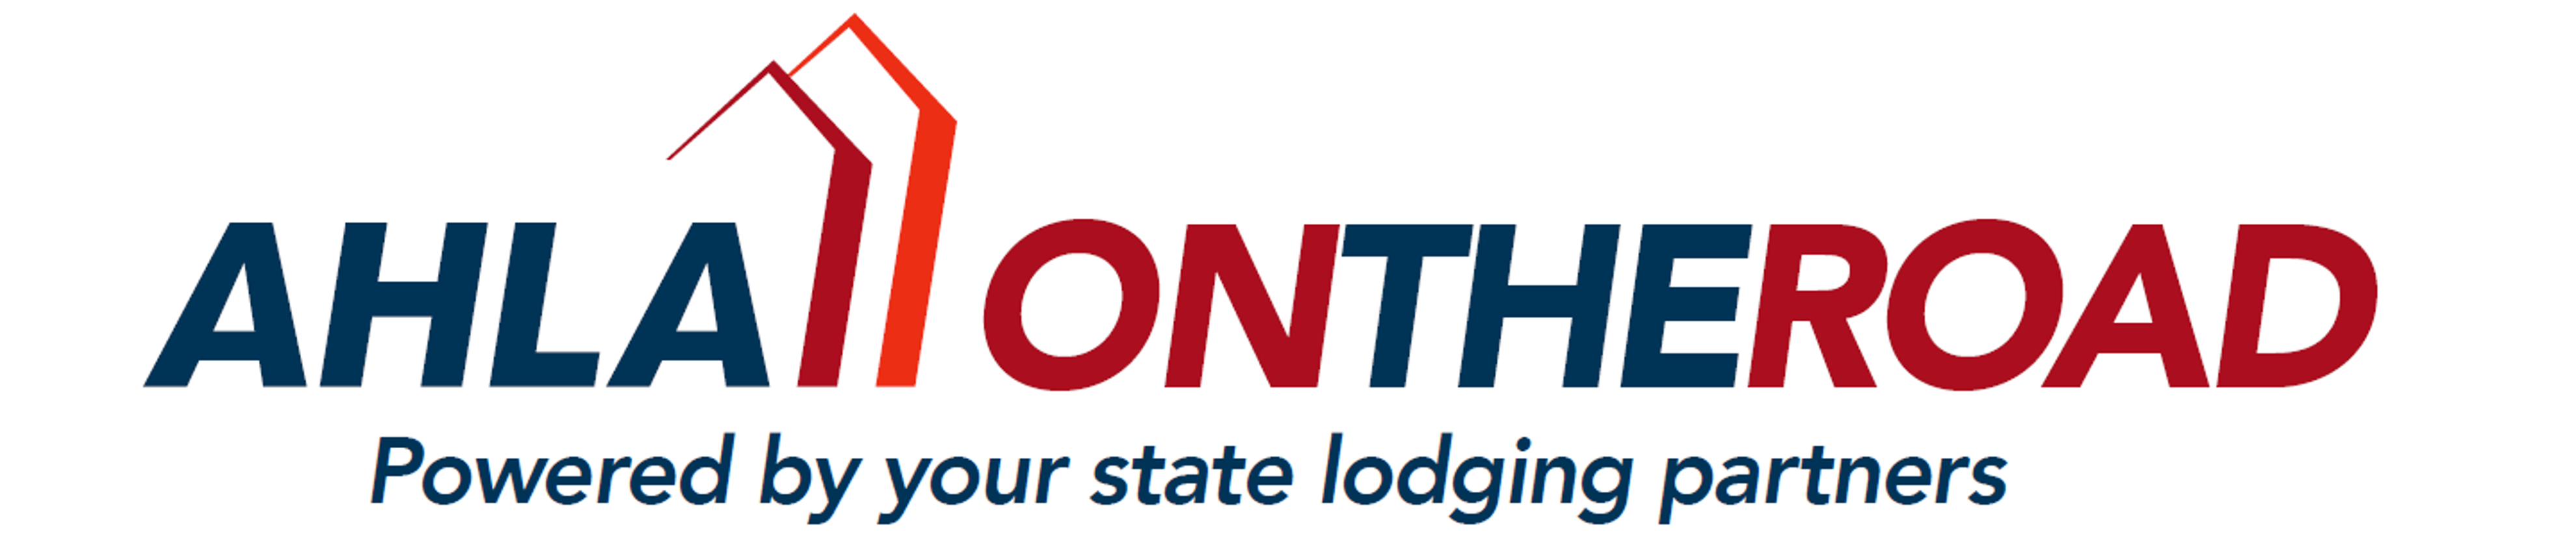 hotel conference logo